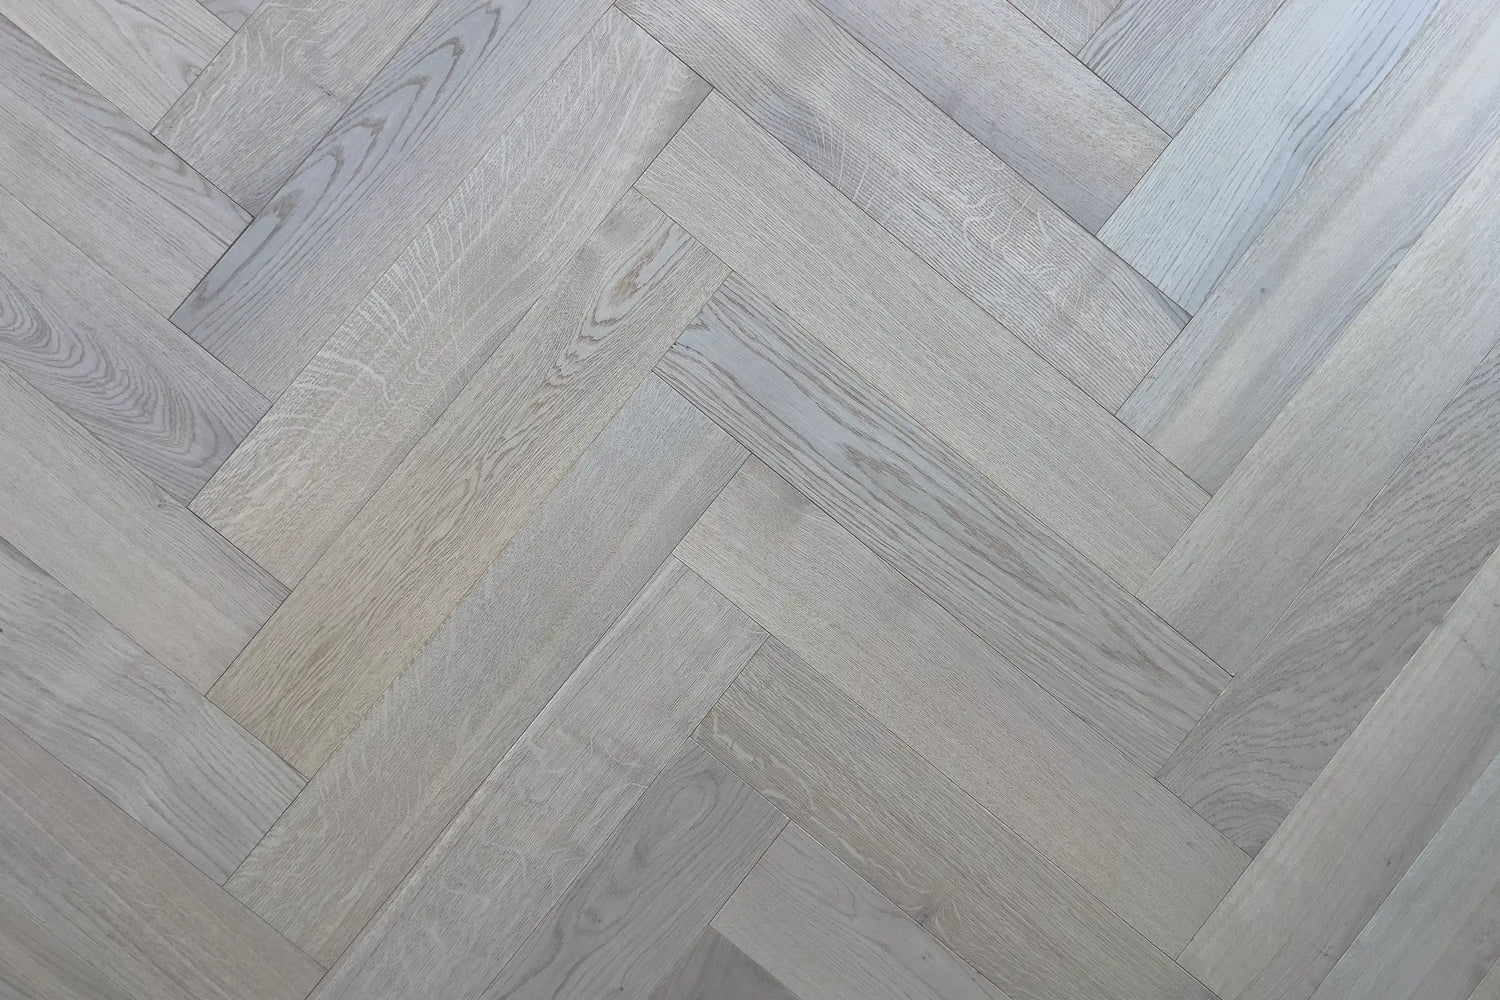 Grenache Herringbone White Oak sustainable wood planks accent wall by WD Walls